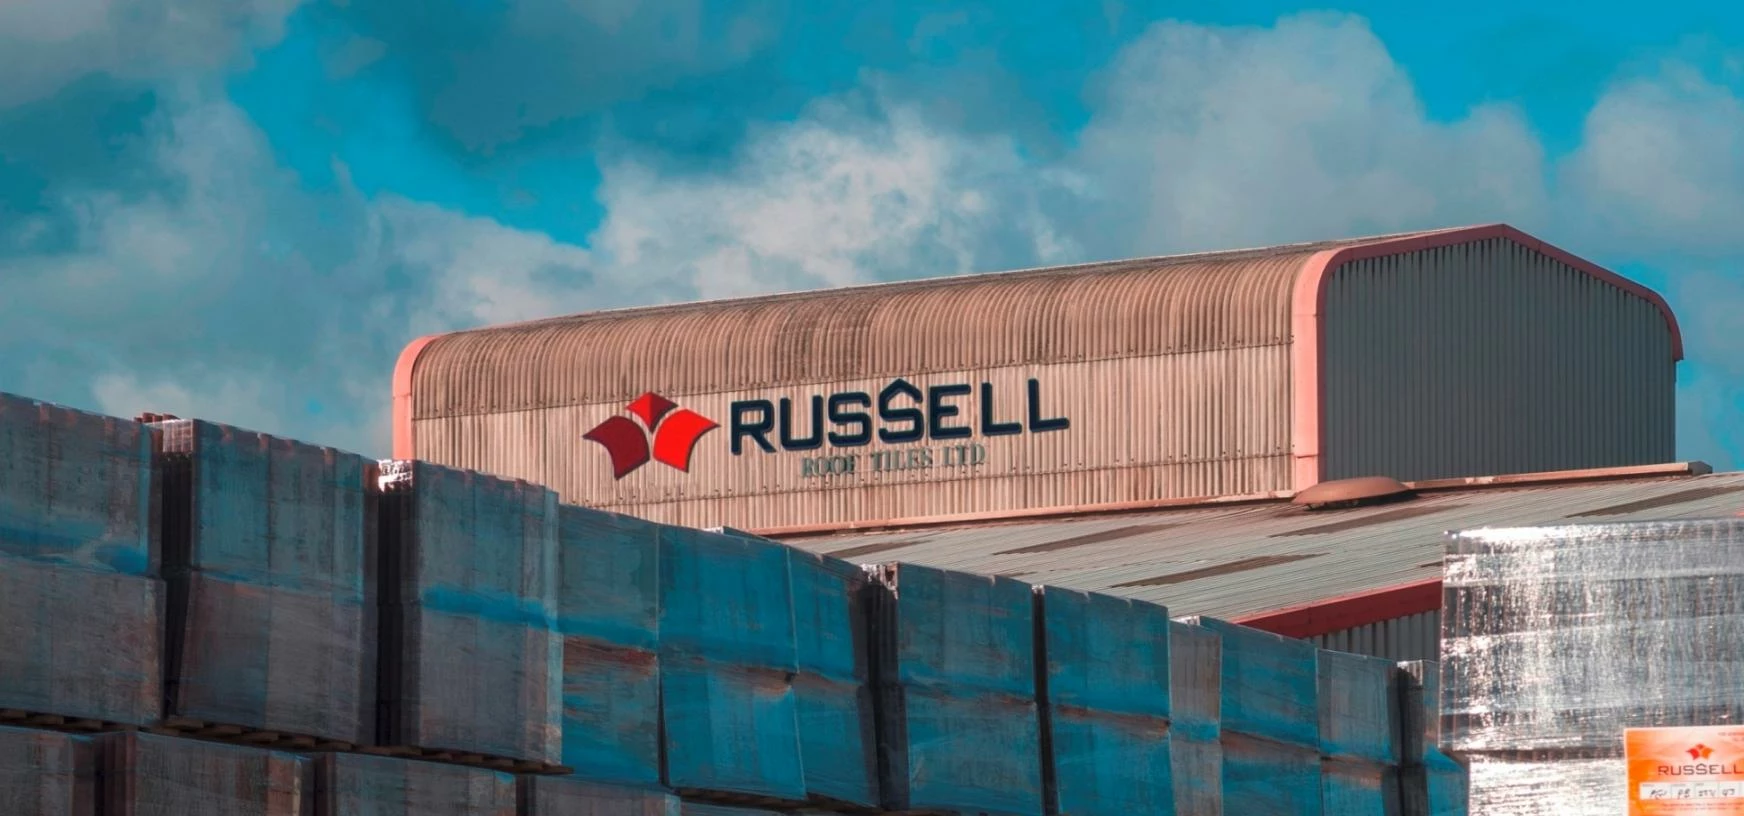 Russell Roof Tiles